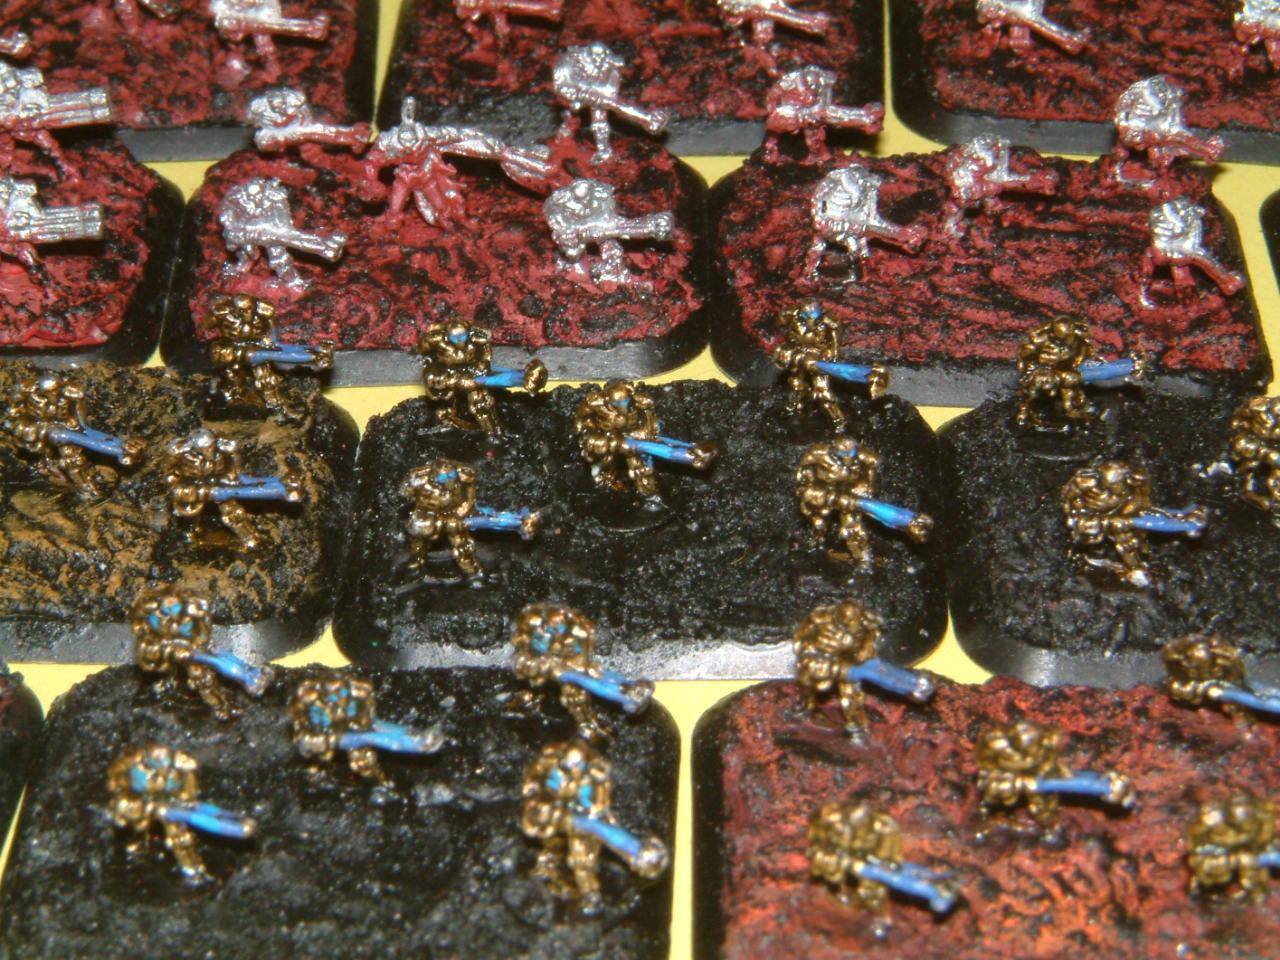 Army, Conversion, Cool, Dead, Epic, Extinctor, Gaukler, Gauss, Lord, Metallic, Necrons, Old, Oldhammer, Quest, Rogue, Scratch Build, Skeletons, Star, Style, Trader, Undead, Walking, Warriors